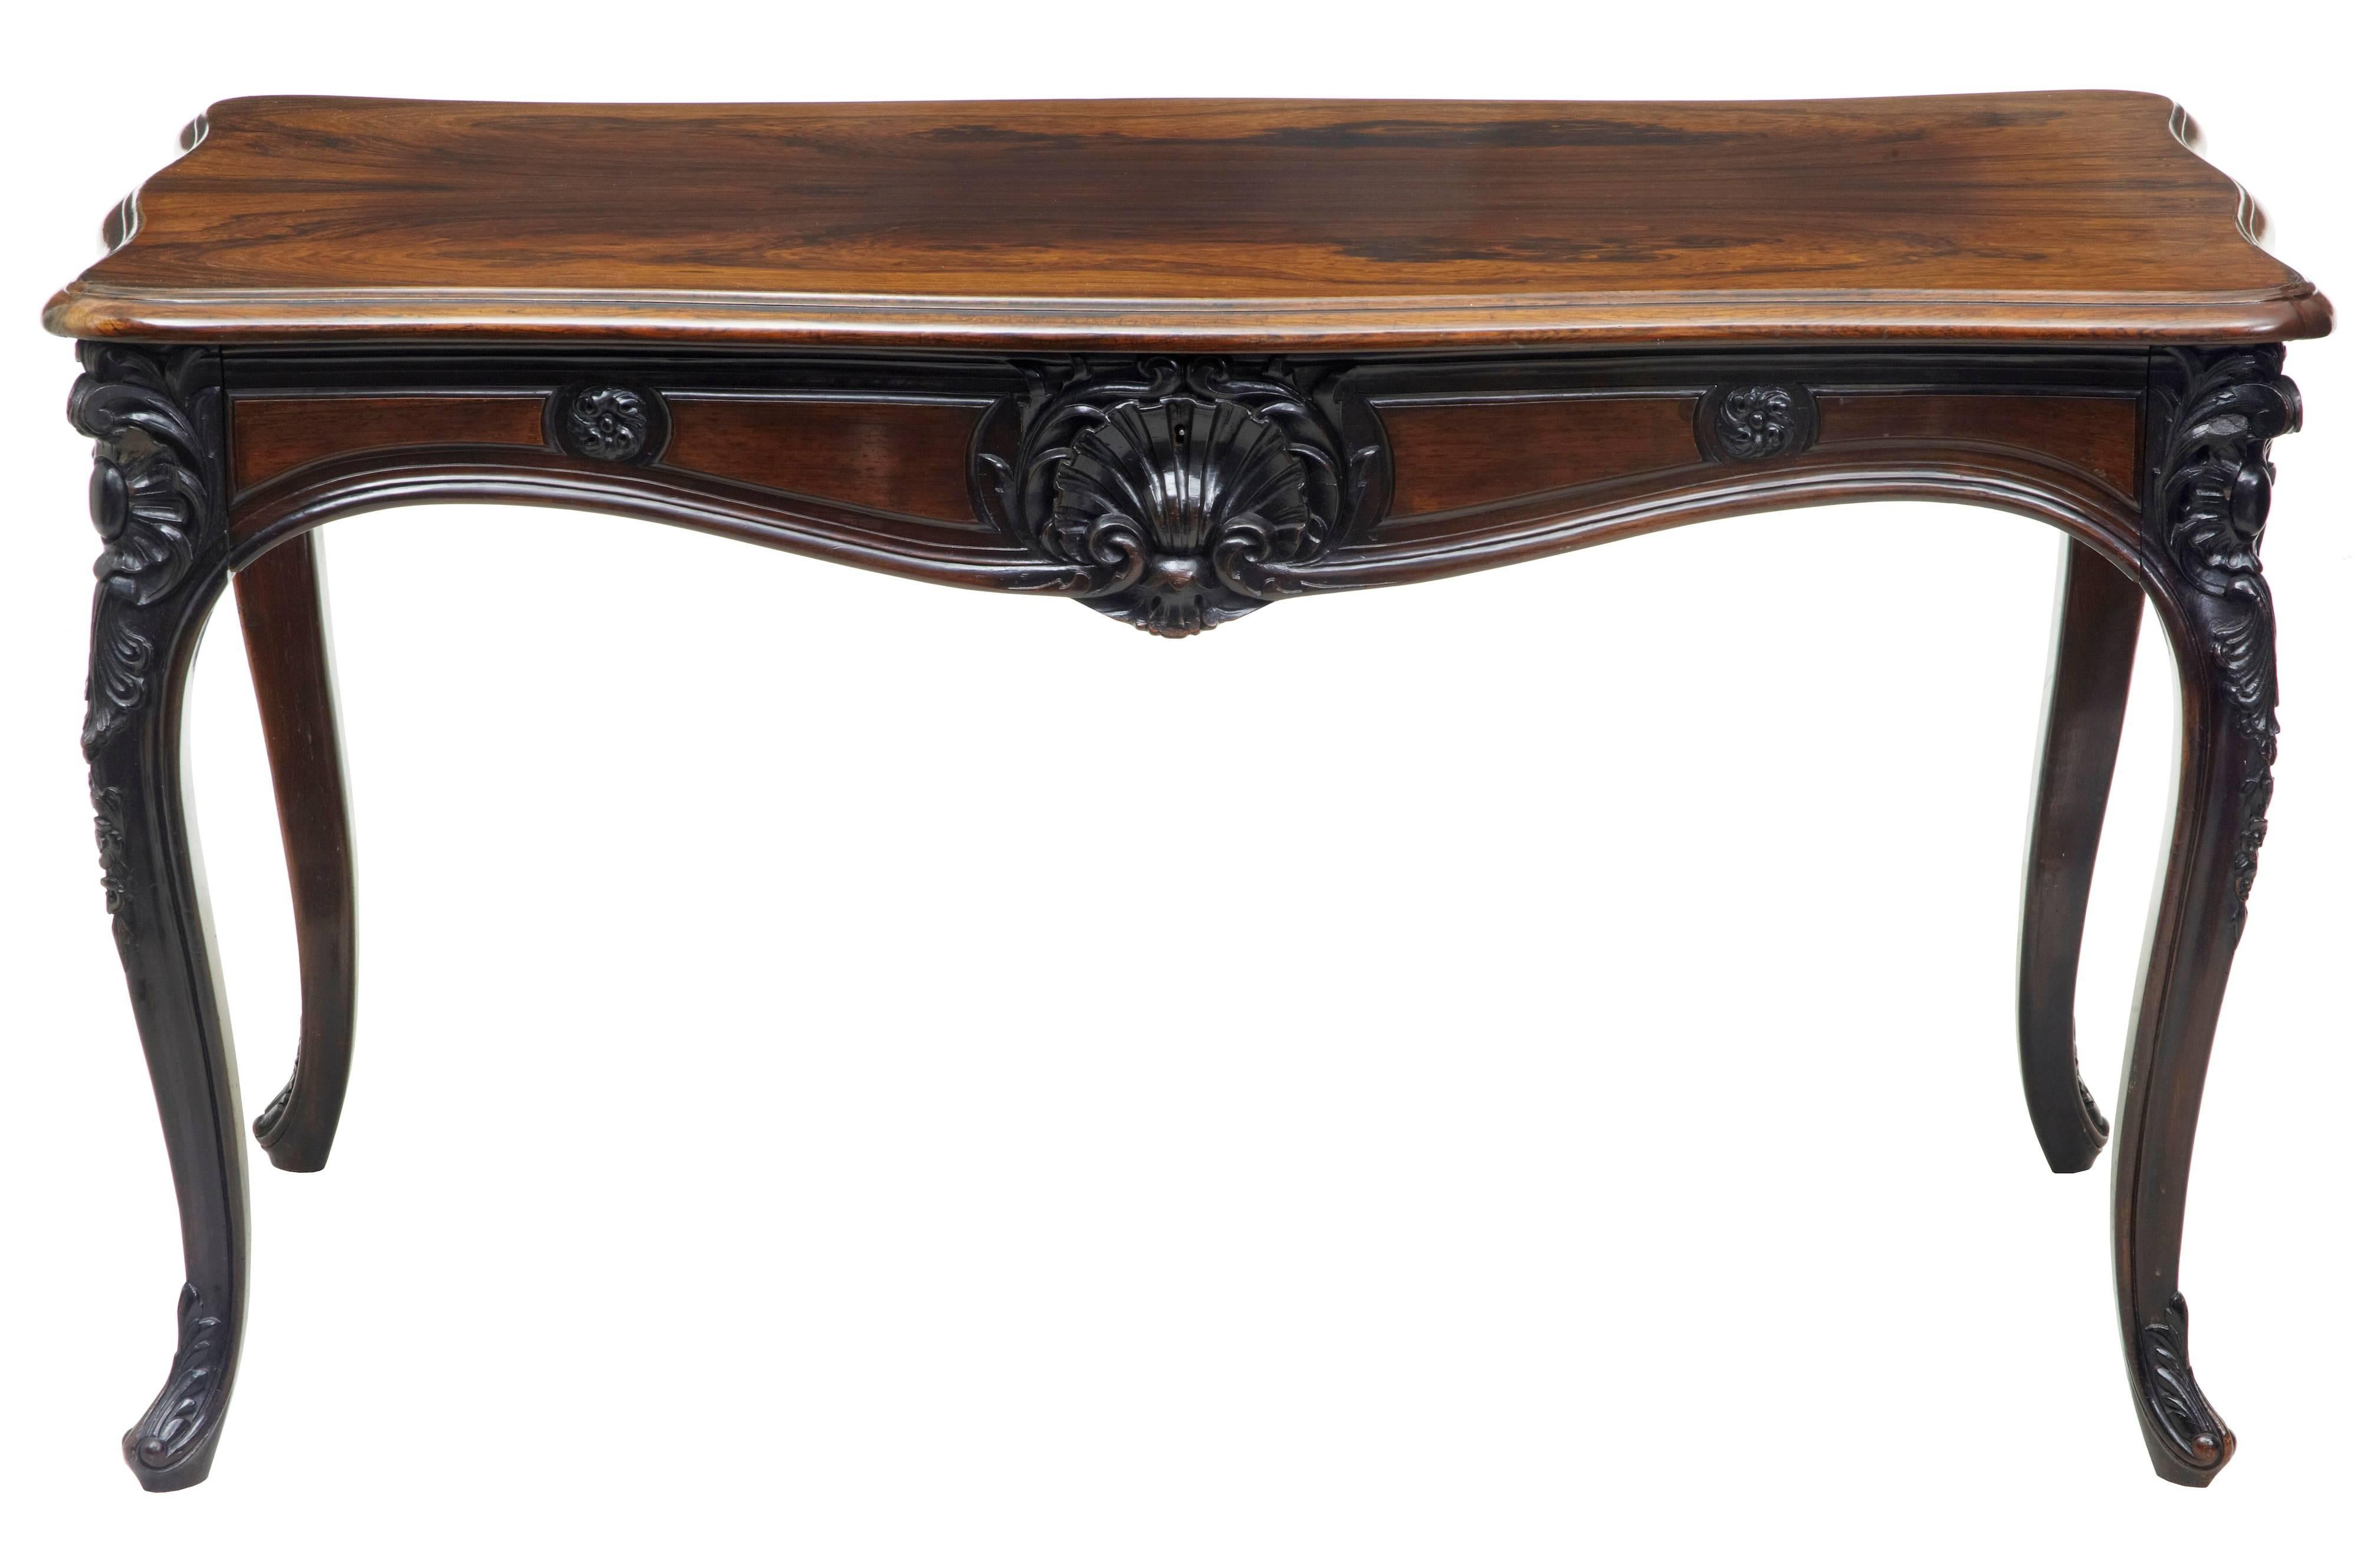 Good quality carved rosewood occasional table or desk, circa 1880.
Beautiful grain and color to this table that could be used as a sofa or hall table or a ladies desk.
Single large drawer to the front with partitions.
Shaped top edge, carving